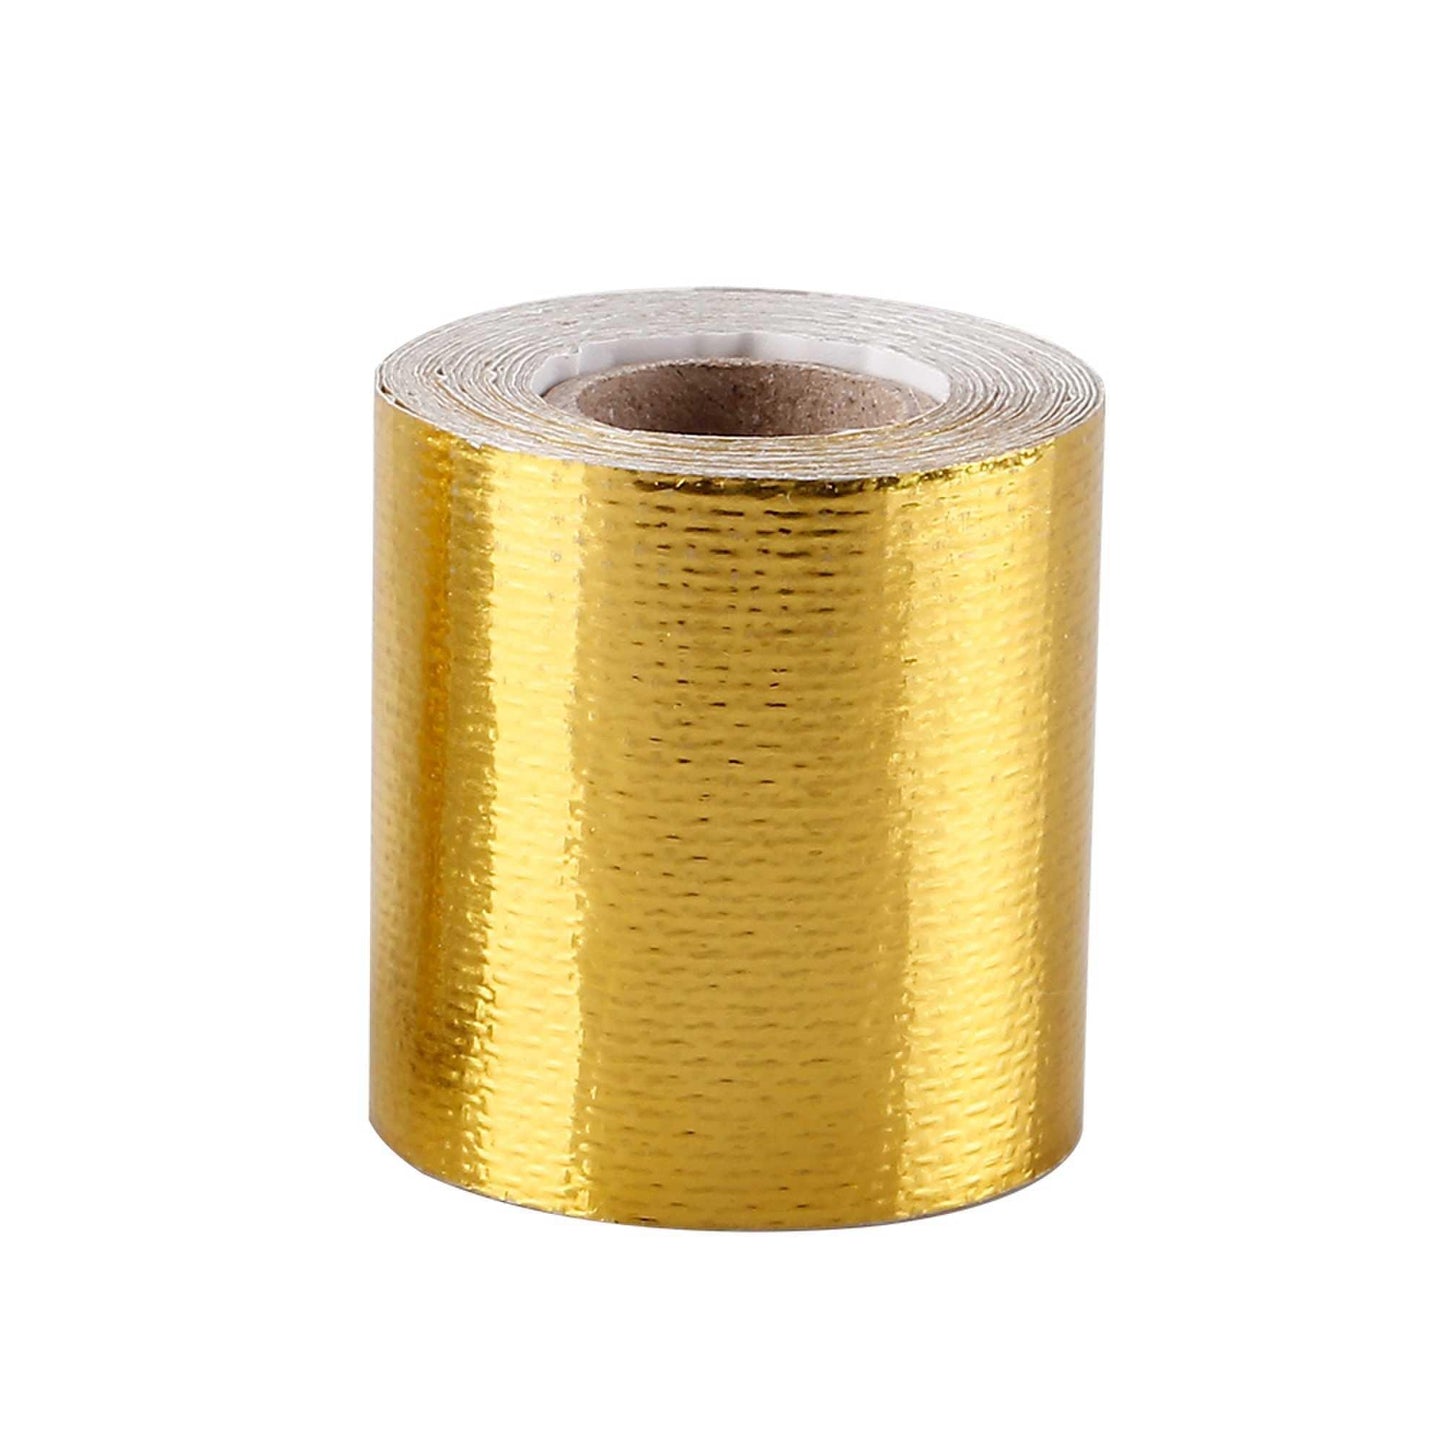 RASTP 2 Inch 5M Thermal Exhaust Tape for Ductwork, Dryer Vent, HVAC - RASTP